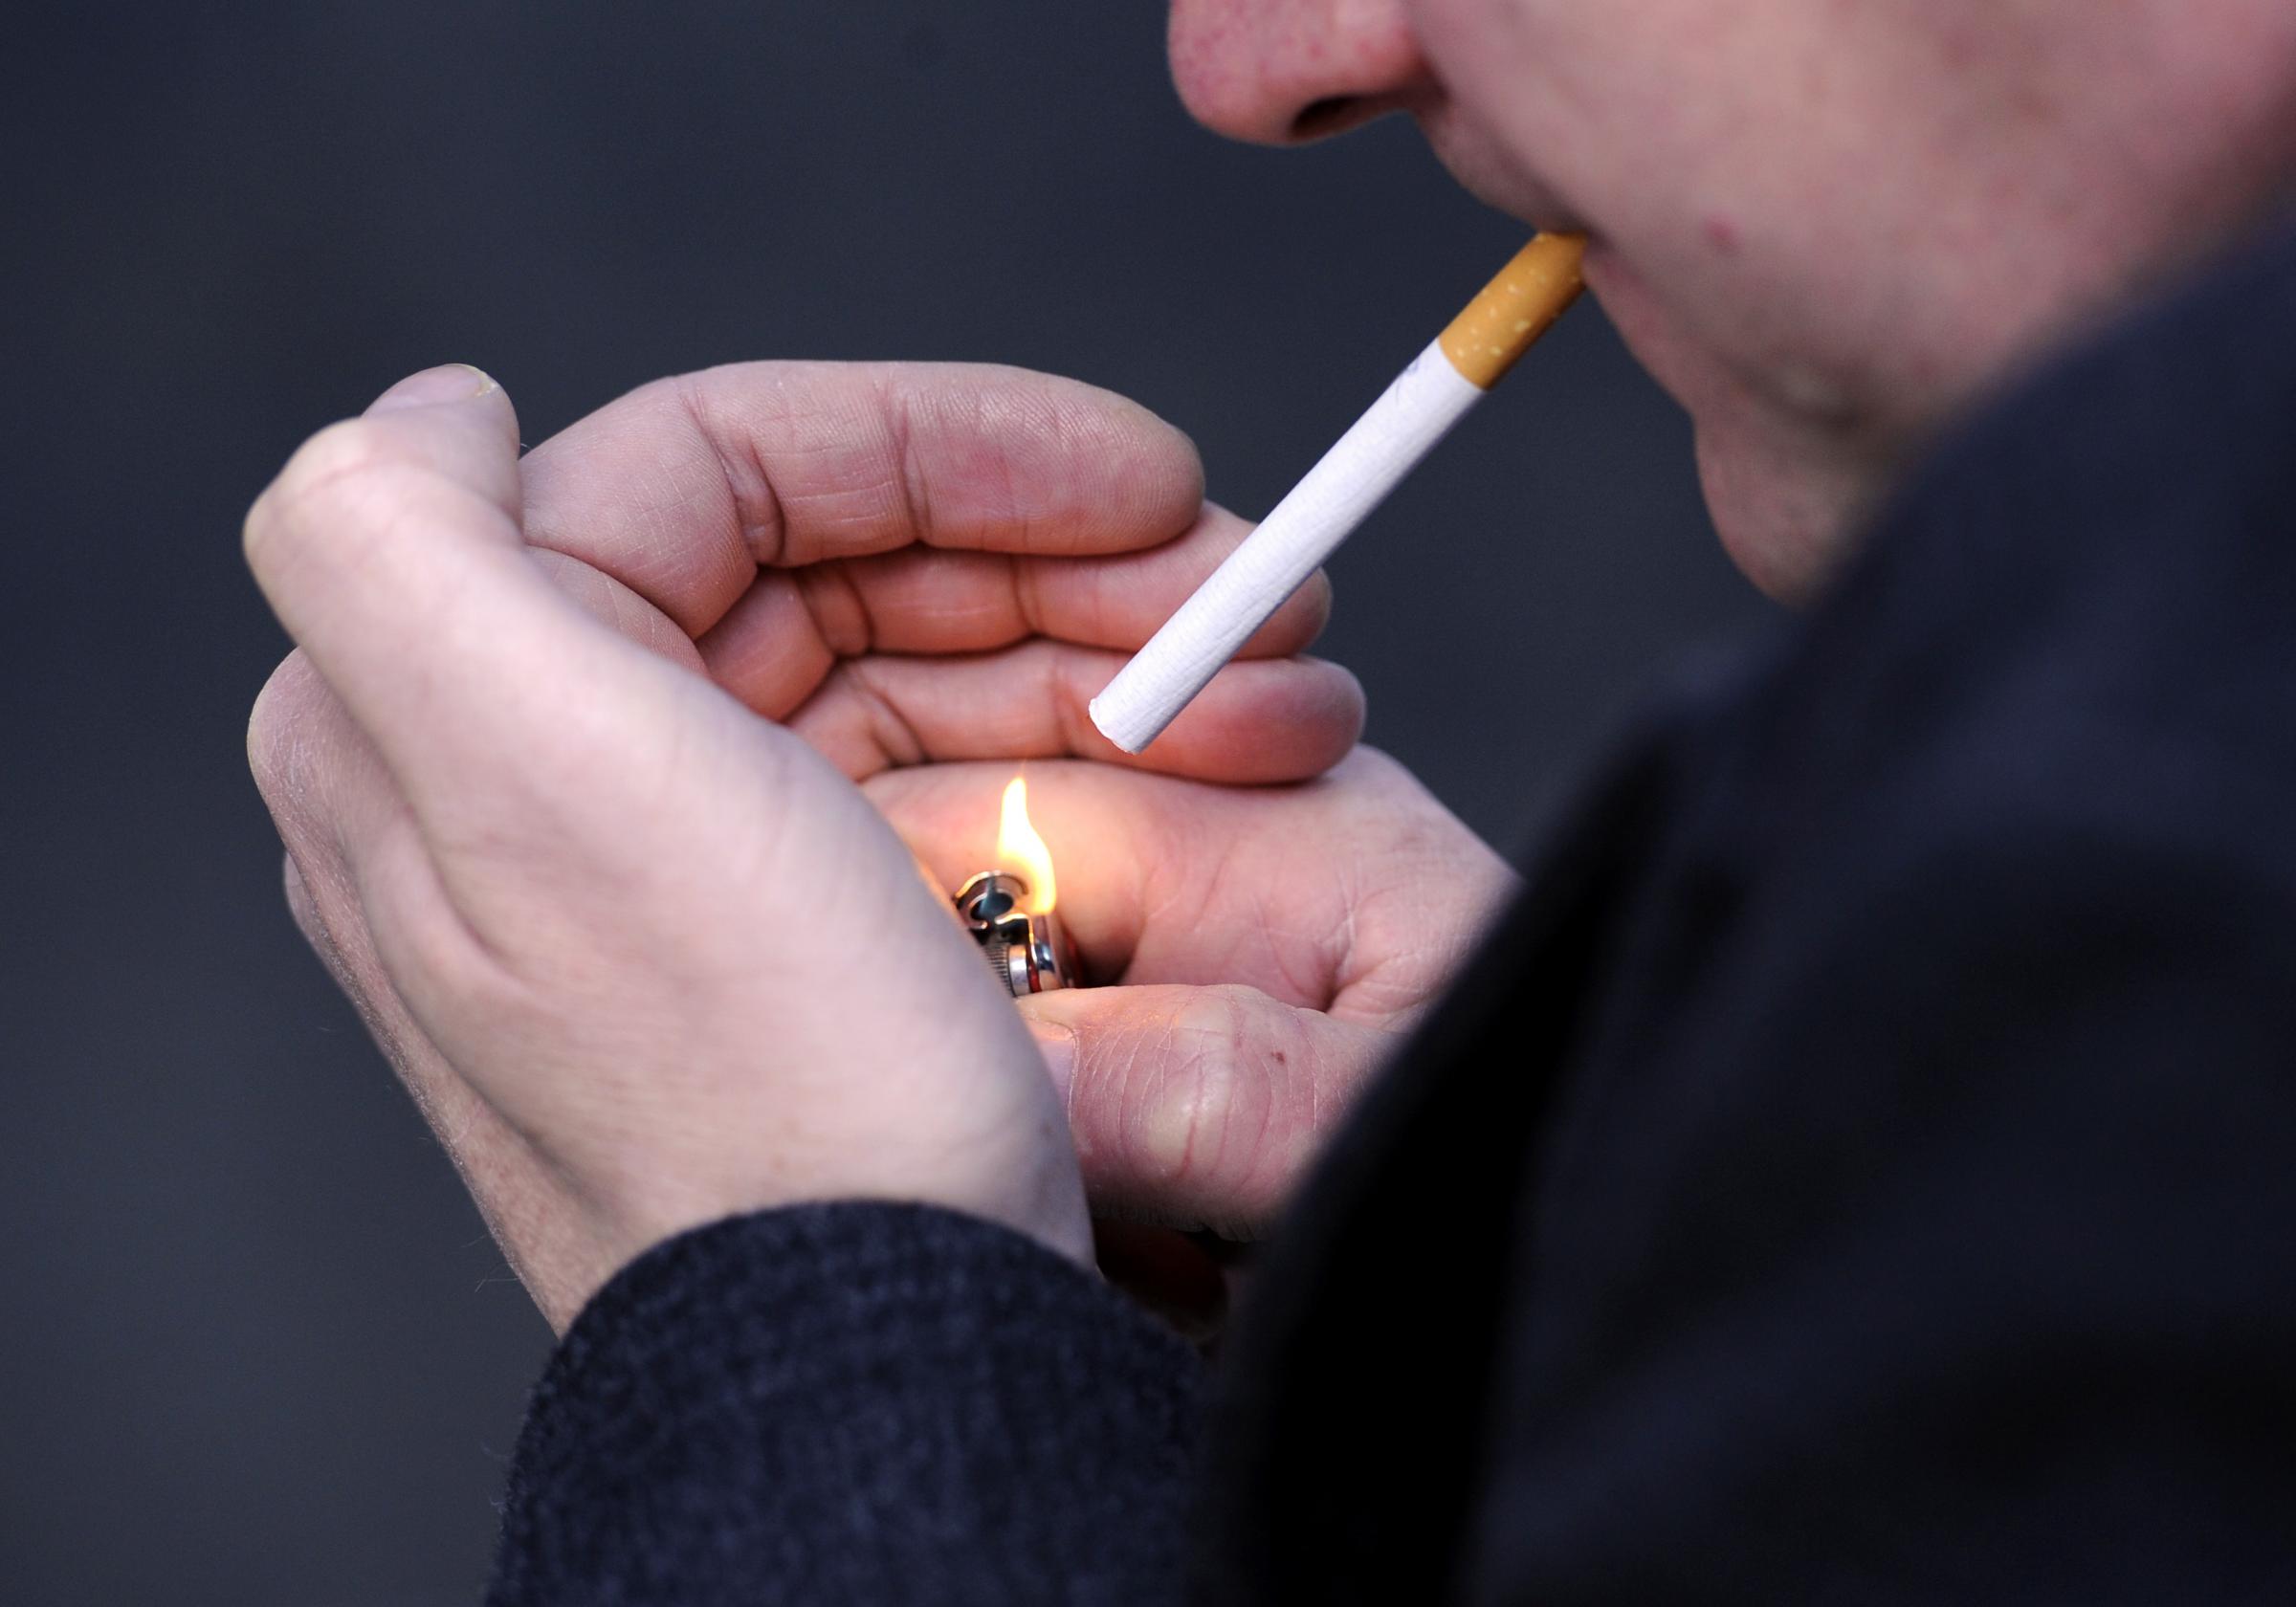 Less than half of smokers admitted to hospital are offered advice on how to quit, according to a new poll